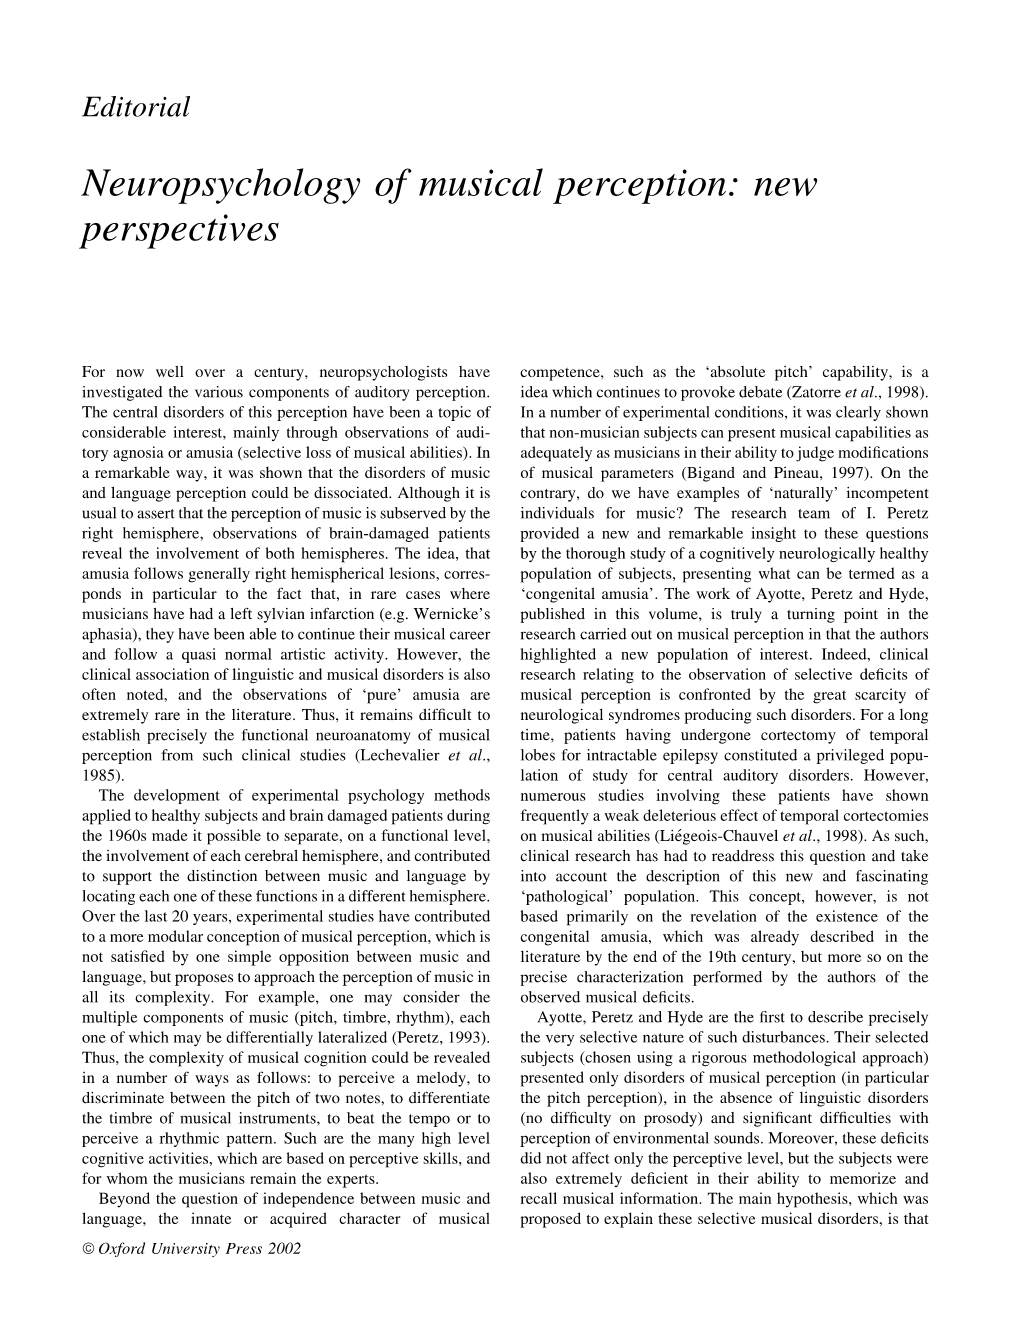 Neuropsychology of Musical Perception: New Perspectives